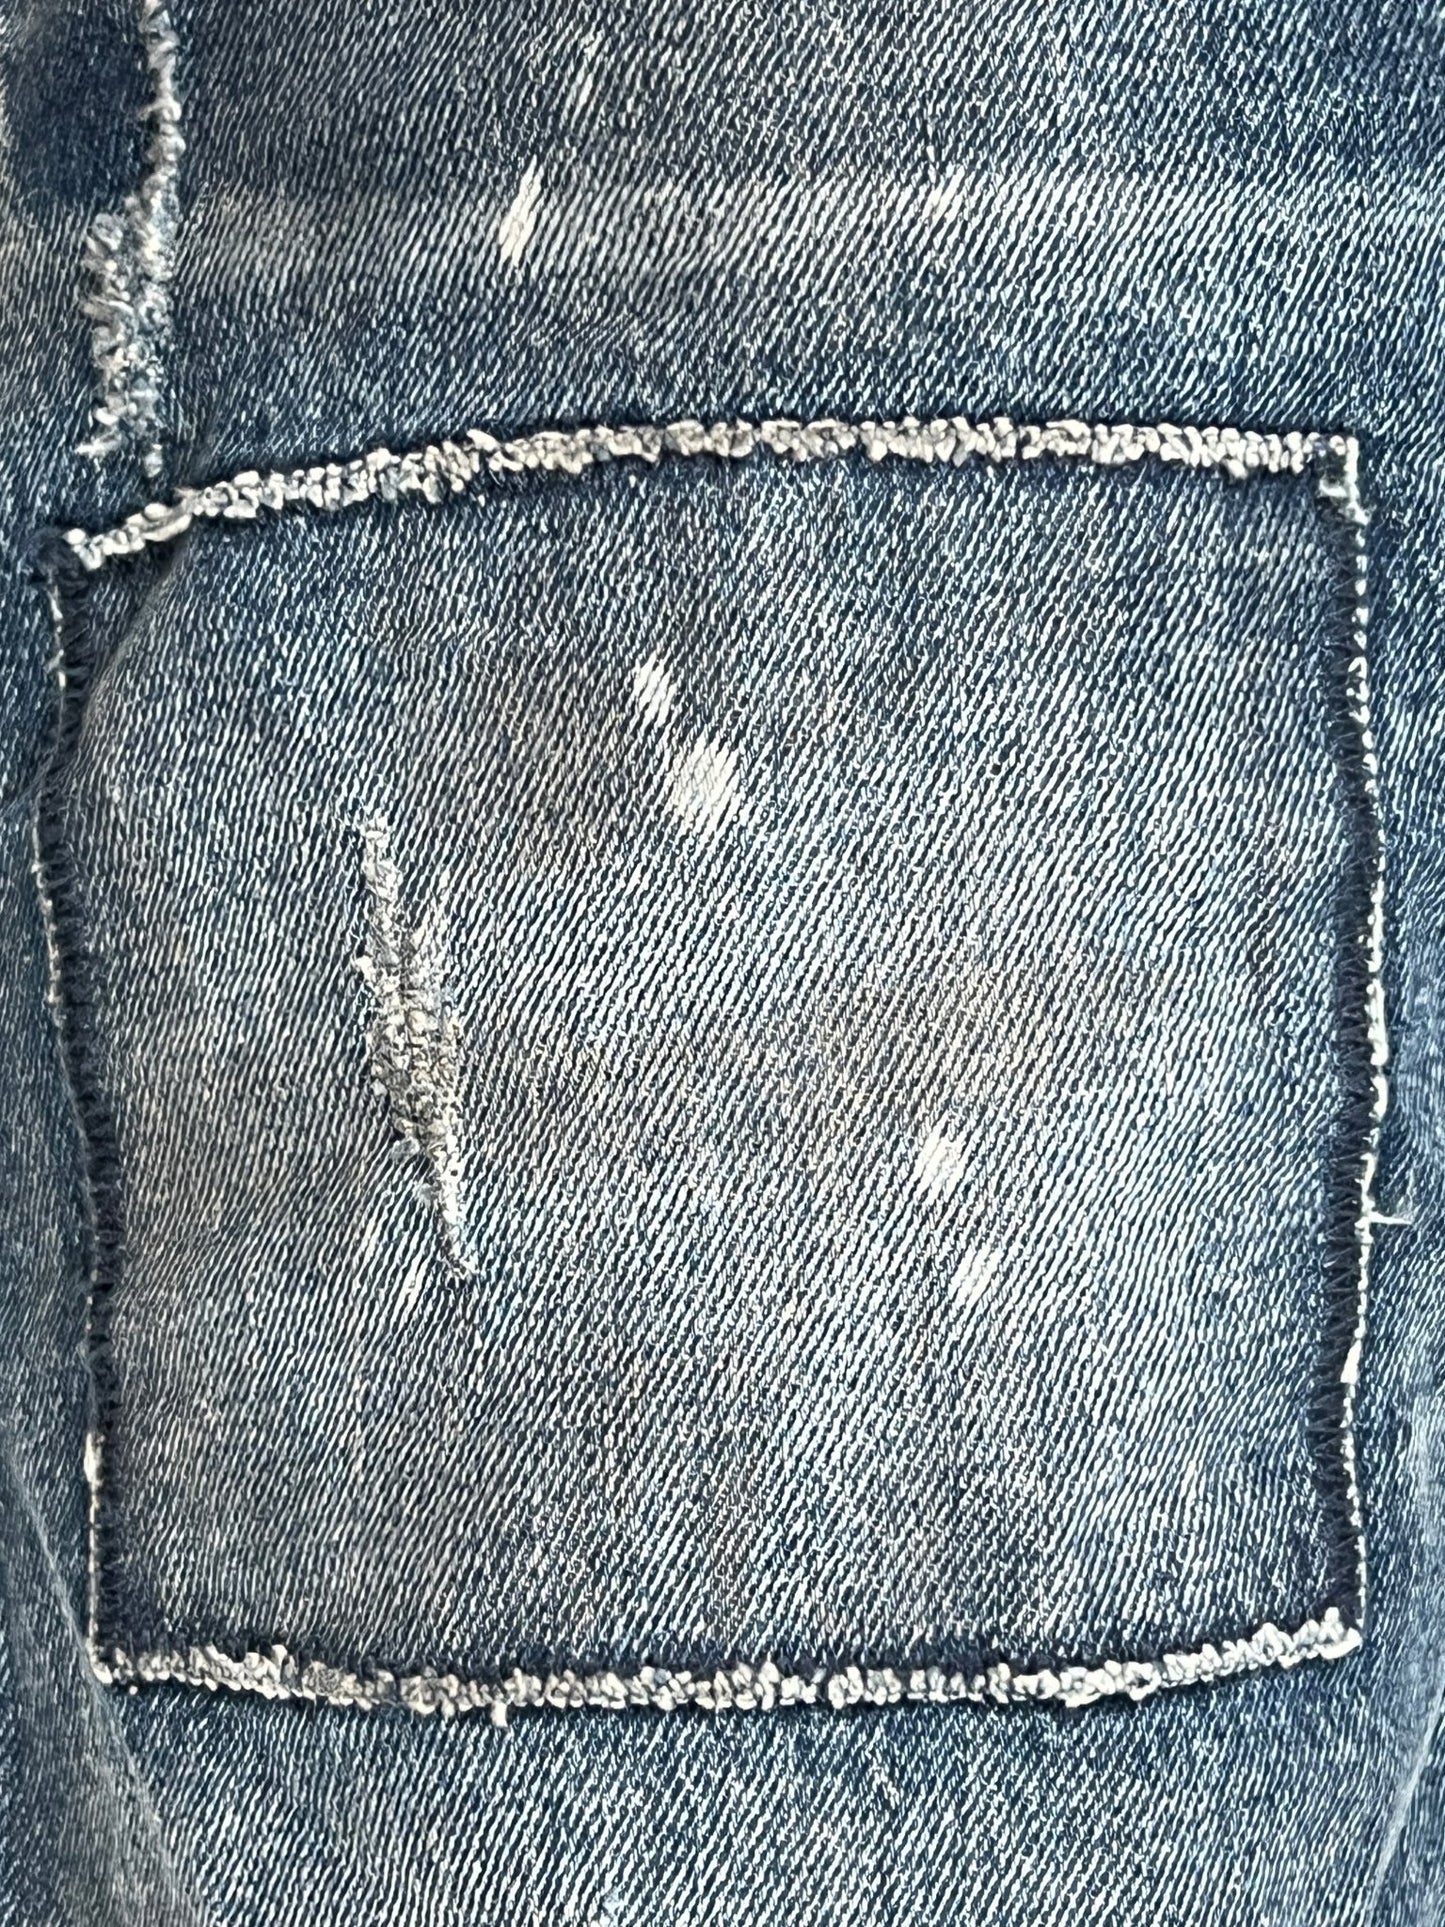 A close up of a pair of Purple Brand vintage jeans with holes in them.